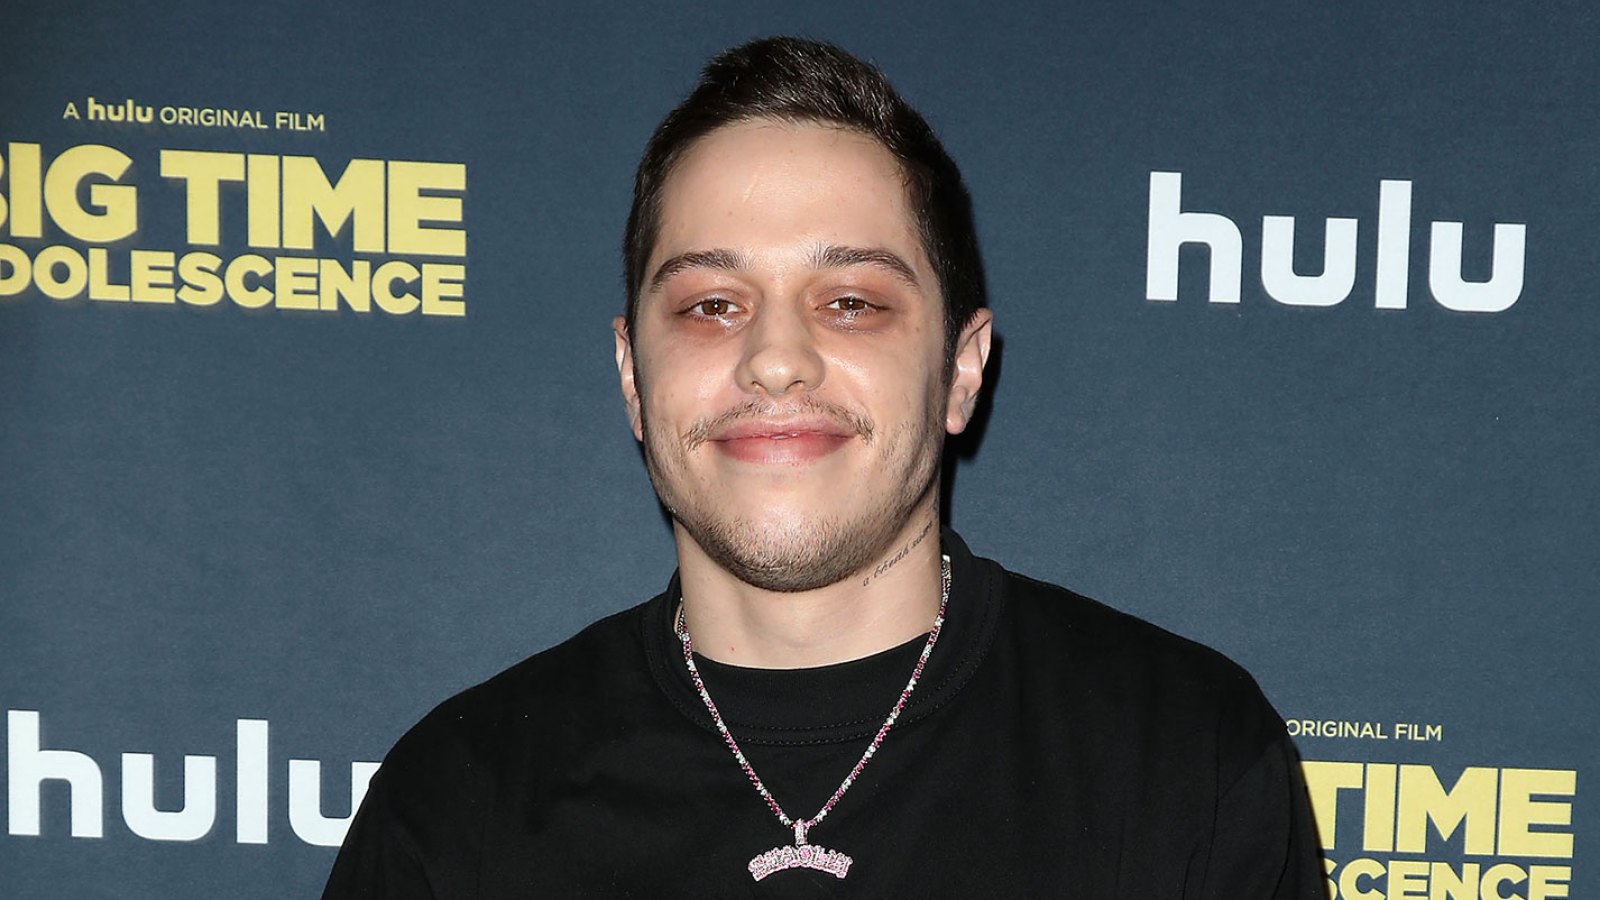 Pete Davidson Is Going to Space